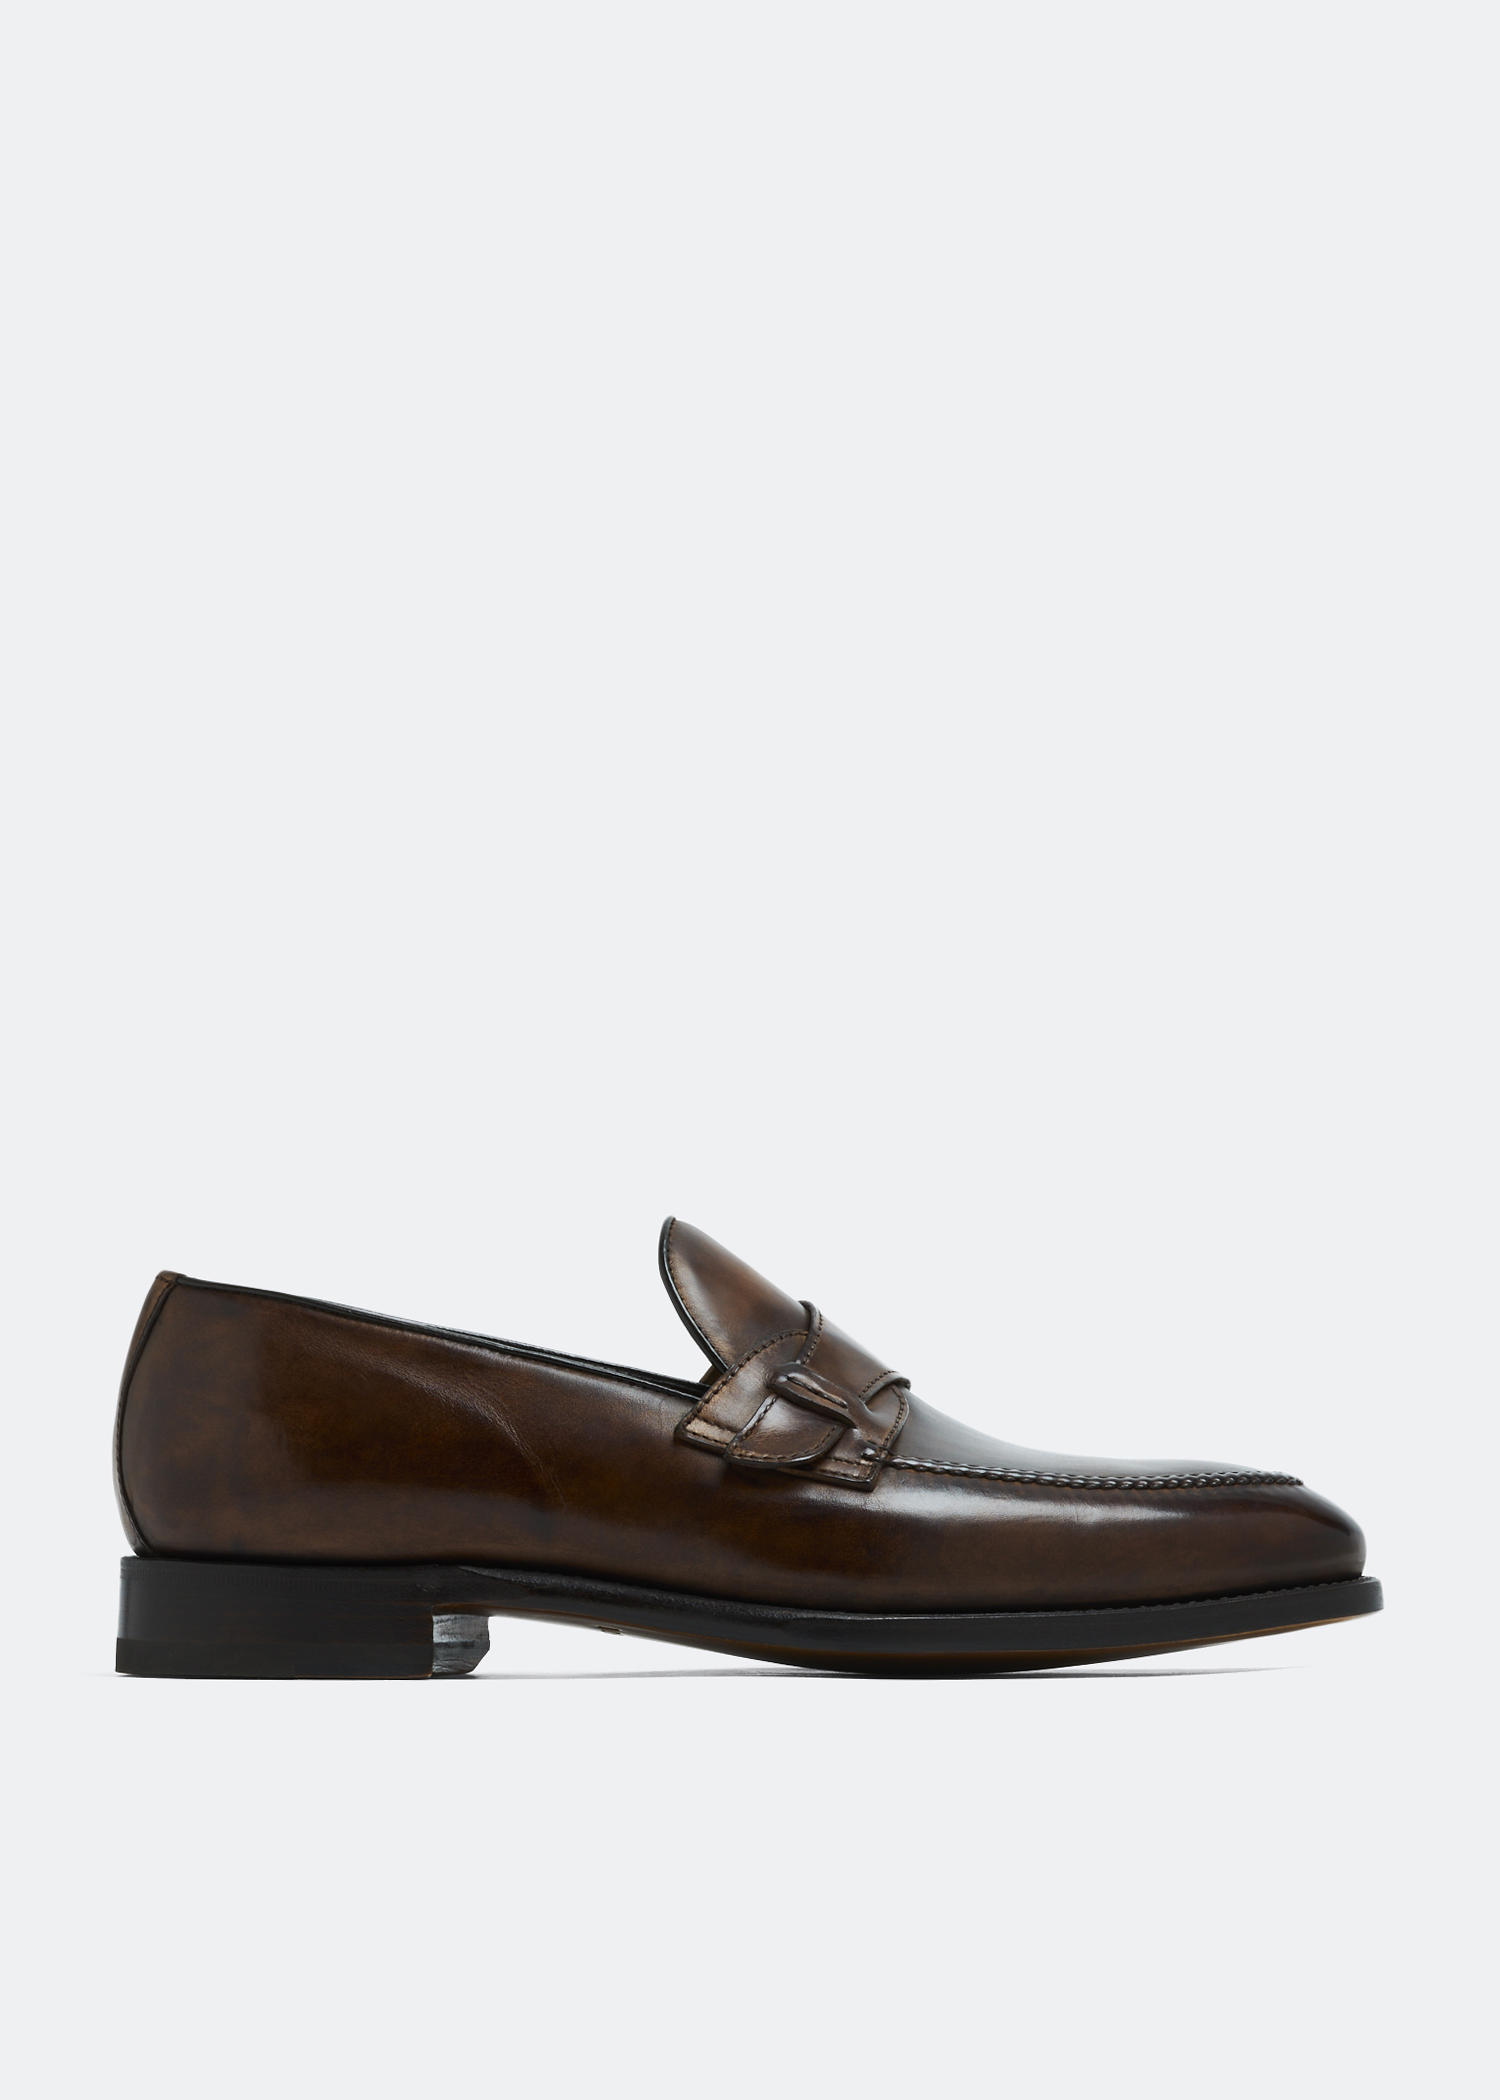 Riviera loafers